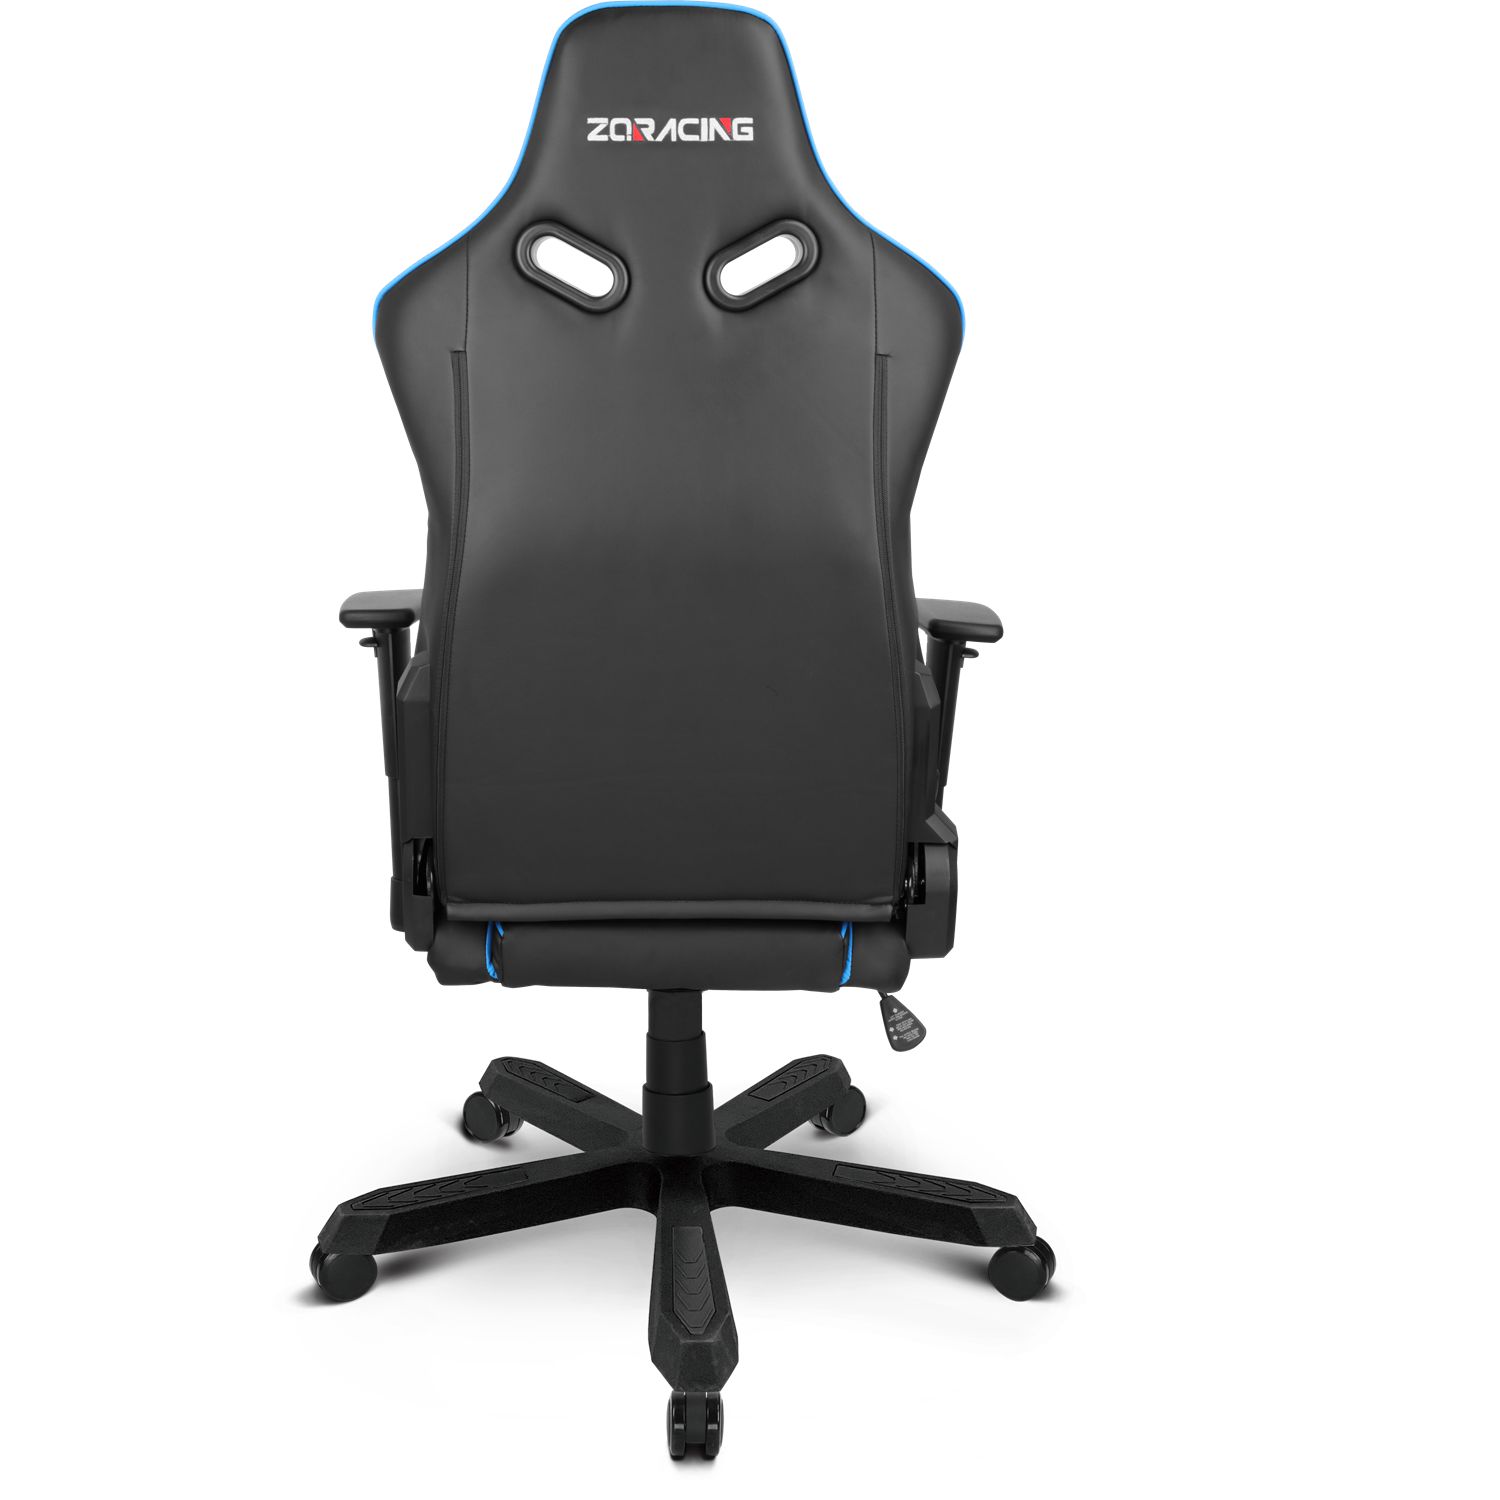 ZQRacing Alien Series Gaming Office Chair-Blue/Black - ZQRacing